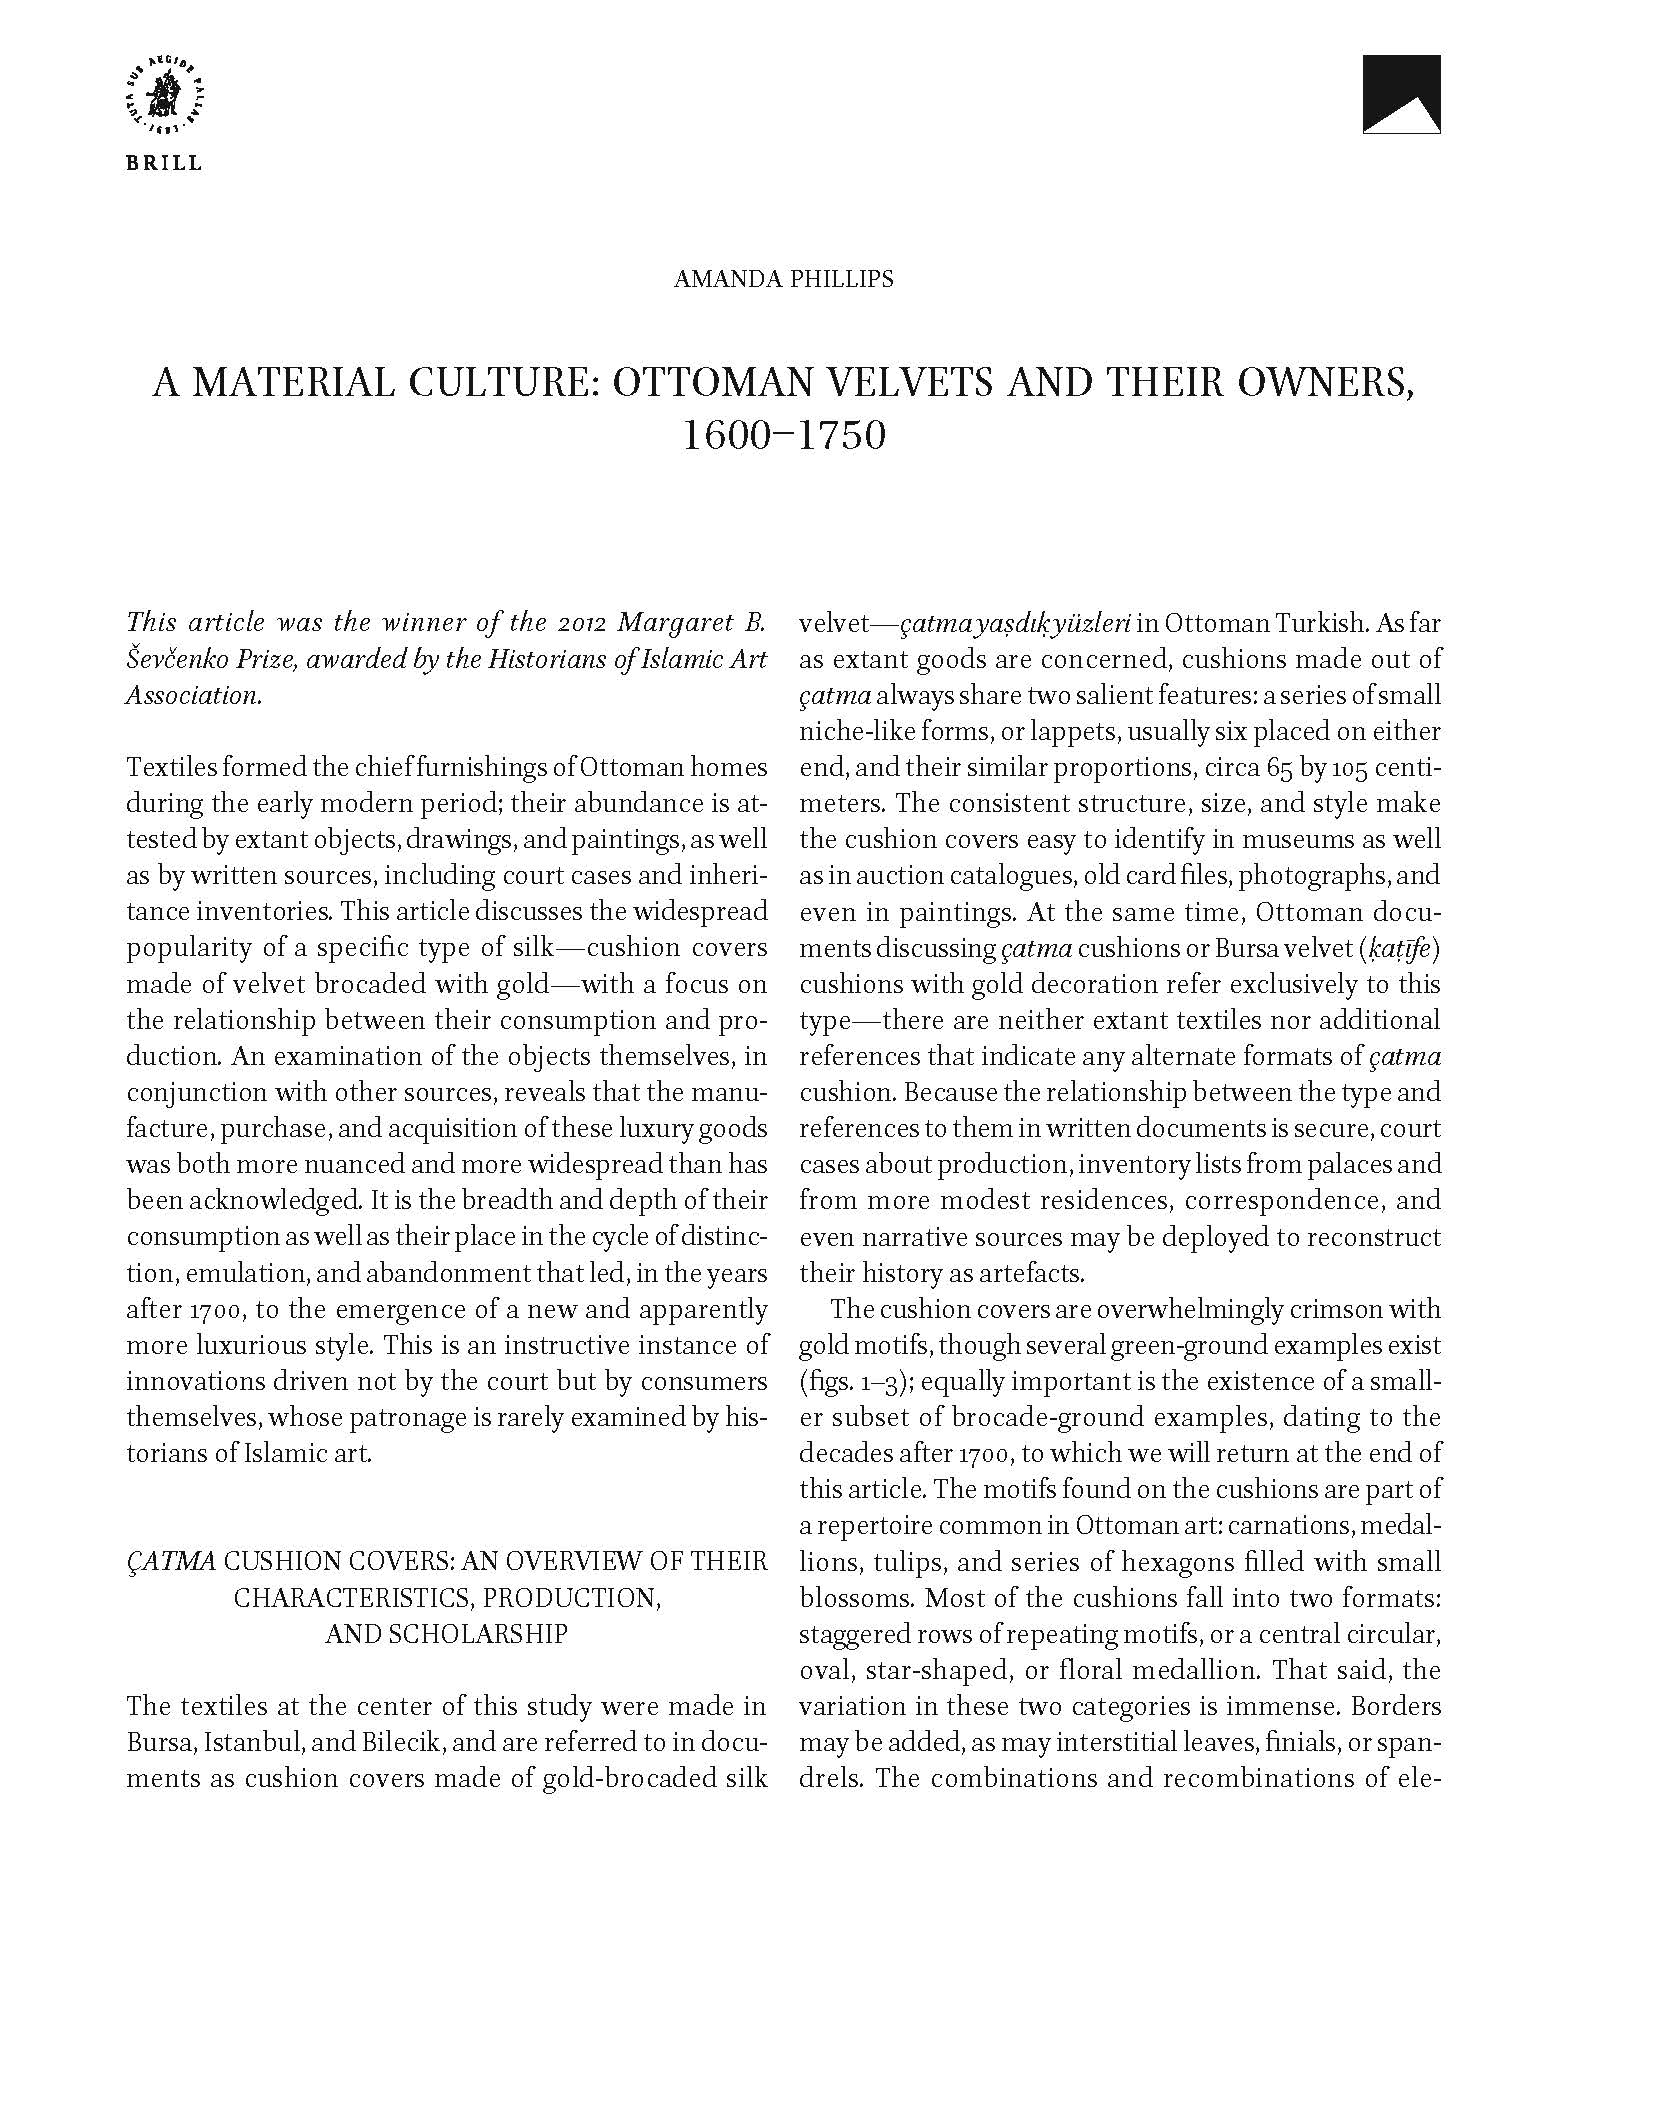 A Material Culture: Ottoman Velvets and Their Owners, 1600-1700